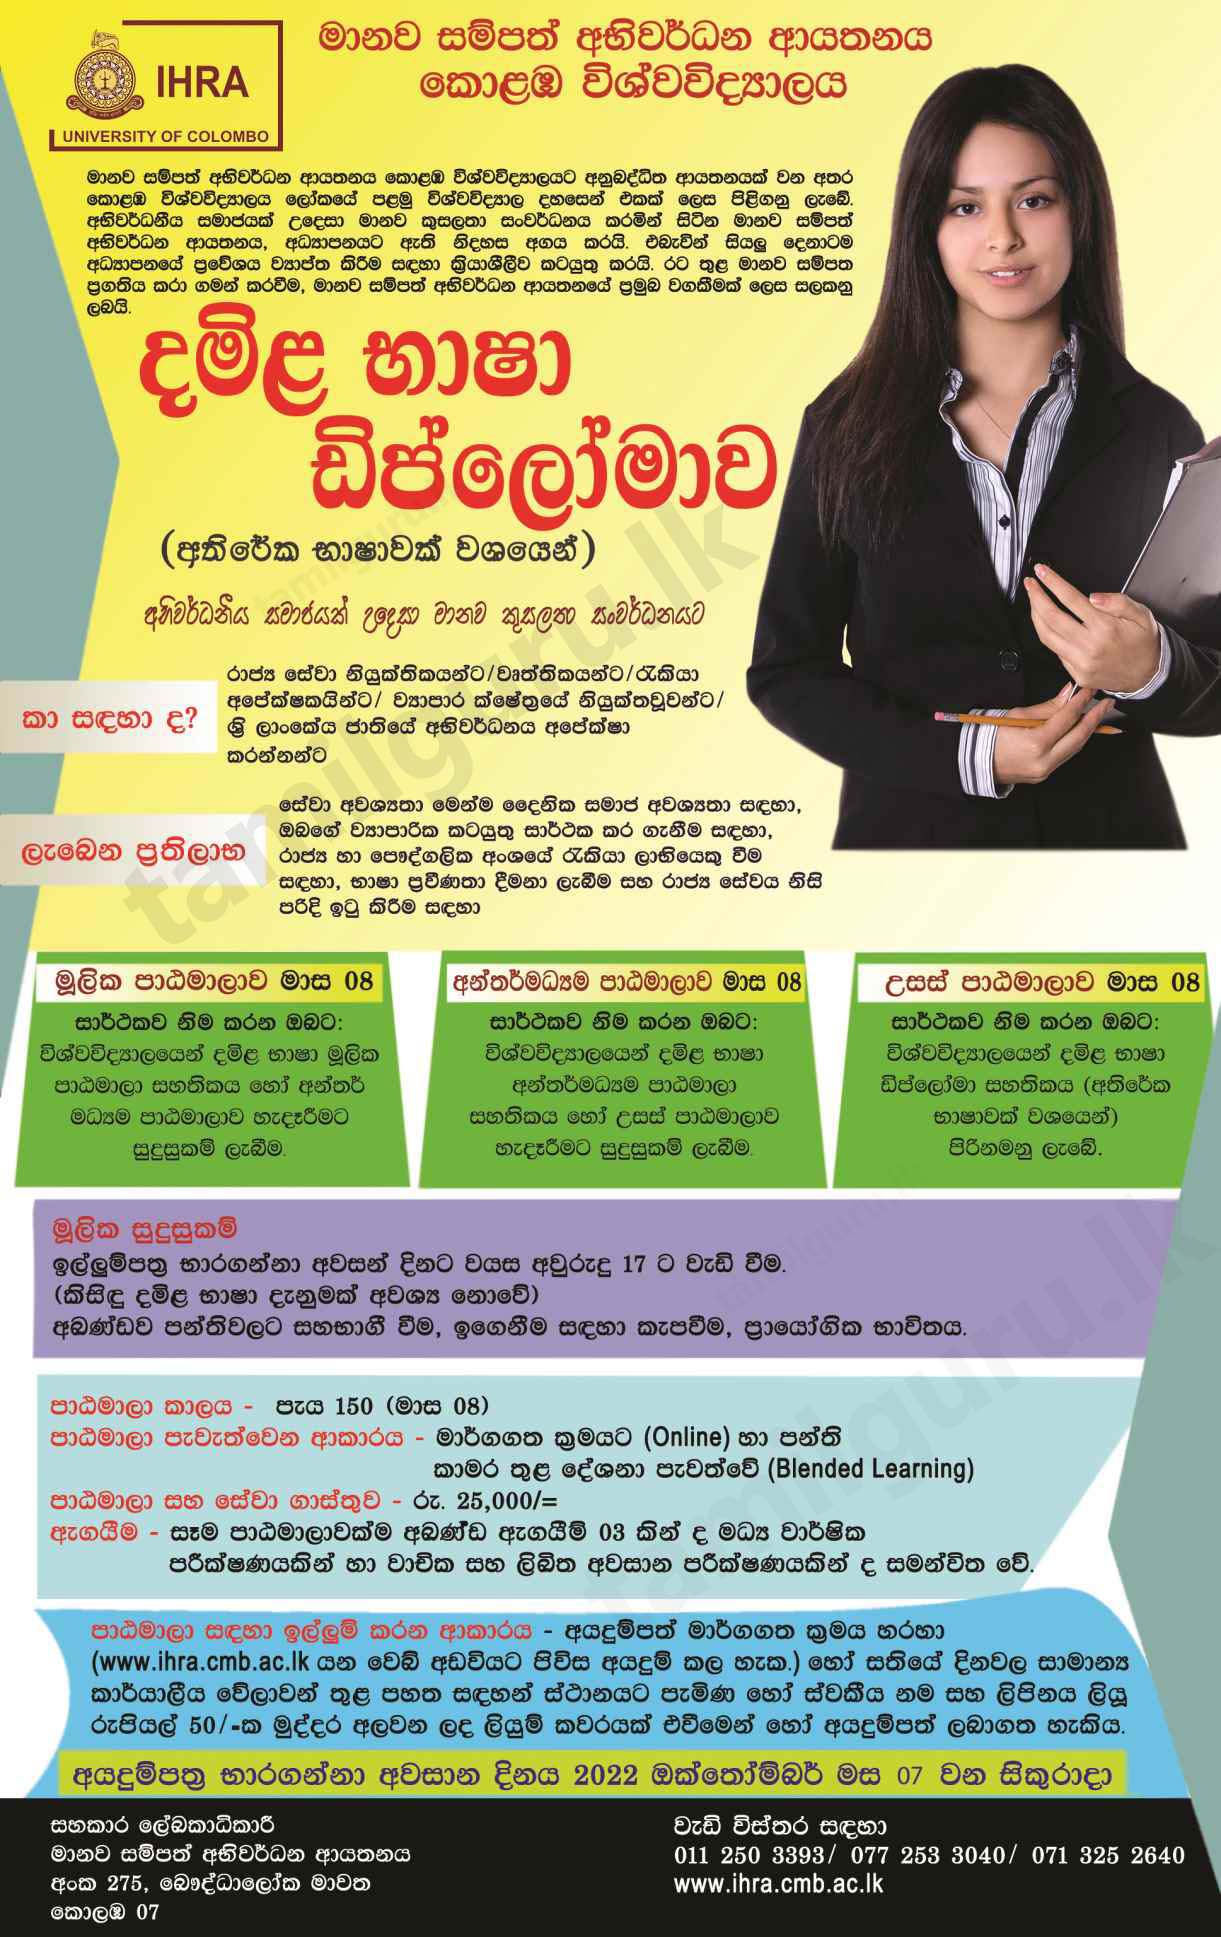 Diploma in Tamil as an Additional Language Course Application (2022 No -18) - IHRA, University of Colombo